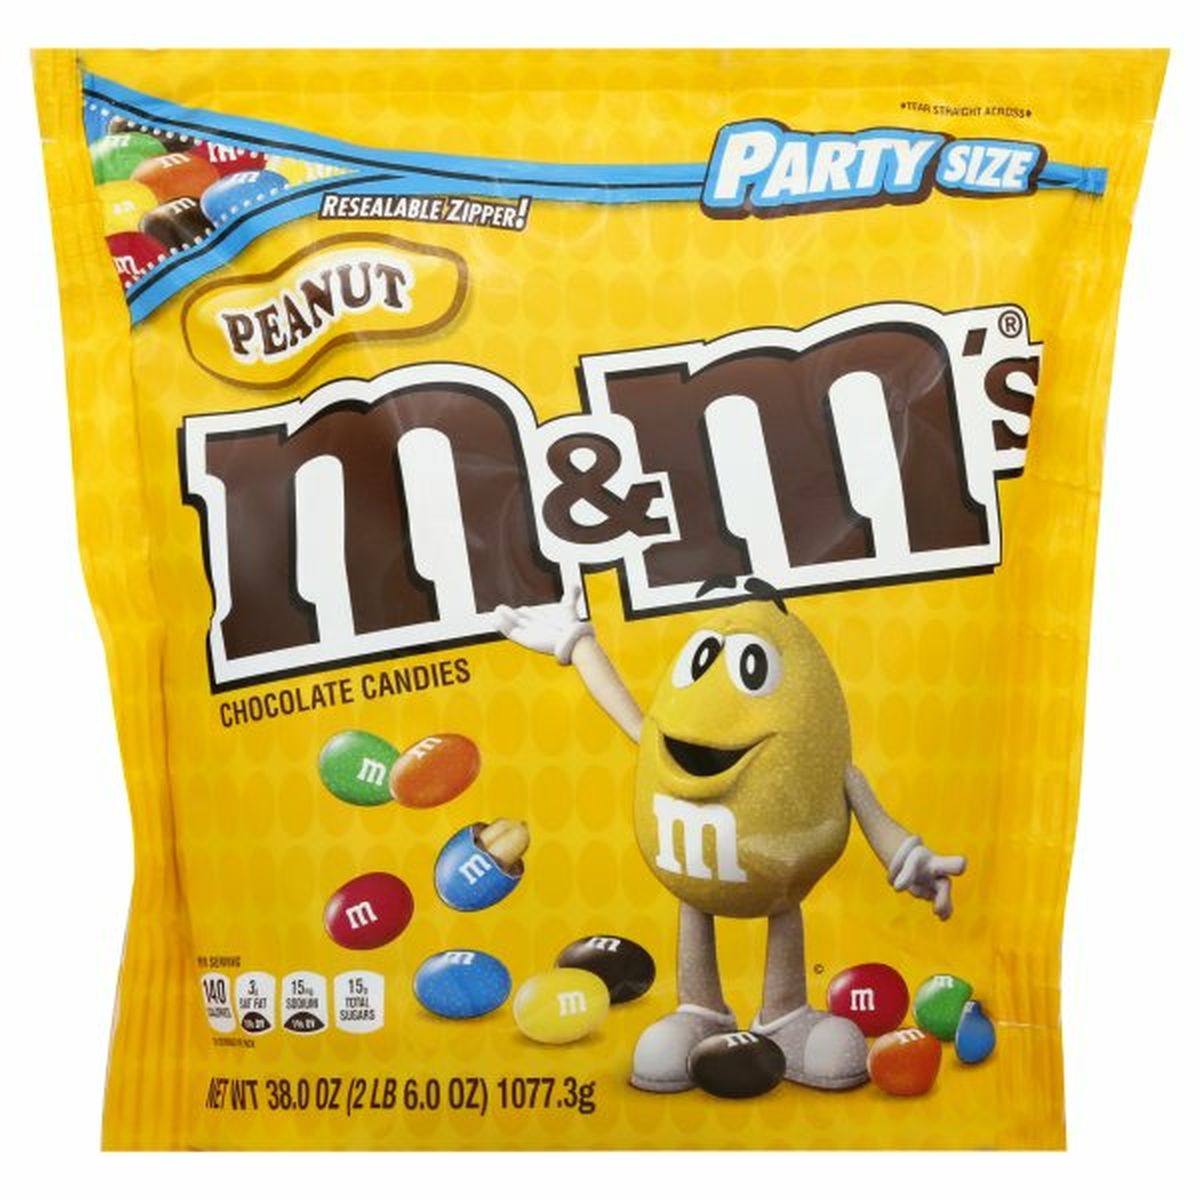 Calories in M&M's Chocolate Candies, Peanut, Party Size